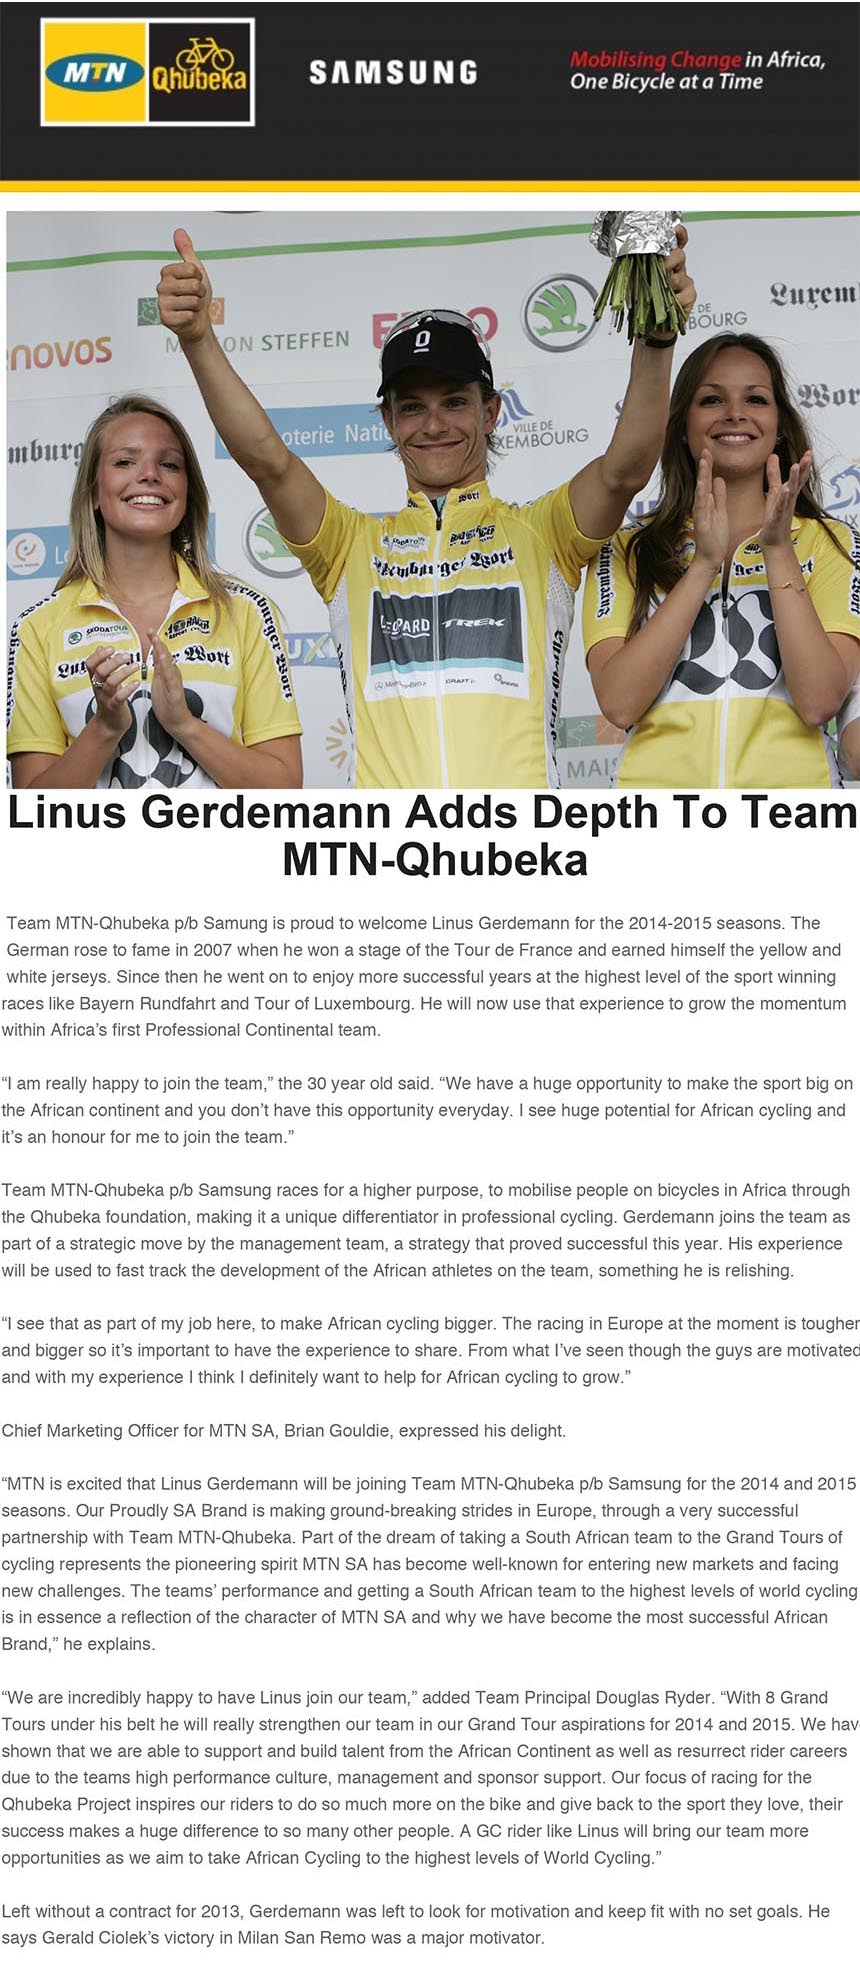 Linus Gerdemann Adds Depth To Team
MTN-Qhubeka
Team MTN-Qhubeka p/b Samung is proud to welcome Linus Gerdemann for the 2014-2015 seasons. The
German rose to fame in 2007 when he won a stage of the Tour de France and earned himself the yellow and
white jerseys. Since then he went on to enjoy more successful years at the highest level of the sport winning
races like Bayern Rundfahrt and Tour of Luxembourg. He will now use that experience to grow the momentum
bikenews@libero.it
A: redazione@bikenews.it
Rispondi a: "bikenews@libero.it" <bikenews@libero.it>
I: Linus Gerdemann adds depth to Team MTN-Qhubeka
19 agosto 2013 21:55
races like Bayern Rundfahrt and Tour of Luxembourg. He will now use that experience to grow the momentum
within Africa’s first Professional Continental team.
“I am really happy to join the team,” the 30 year old said. “We have a huge opportunity to make the sport big on
the African continent and you don’t have this opportunity everyday. I see huge potential for African cycling and
it’s an honour for me to join the team.”
Team MTN-Qhubeka p/b Samsung races for a higher purpose, to mobilise people on bicycles in Africa through
the Qhubeka foundation, making it a unique differentiator in professional cycling. Gerdemann joins the team as
part of a strategic move by the management team, a strategy that proved successful this year. His experience
will be used to fast track the development of the African athletes on the team, something he is relishing.
“I see that as part of my job here, to make African cycling bigger. The racing in Europe at the moment is tougher
and bigger so it’s important to have the experience to share. From what I’ve seen though the guys are motivated
and with my experience I think I definitely want to help for African cycling to grow.”
Chief Marketing Officer for MTN SA, Brian Gouldie, expressed his delight.
“MTN is excited that Linus Gerdemann will be joining Team MTN-Qhubeka p/b Samsung for the 2014 and 2015
seasons. Our Proudly SA Brand is making ground-breaking strides in Europe, through a very successful
partnership with Team MTN-Qhubeka. Part of the dream of taking a South African team to the Grand Tours of
cycling represents the pioneering spirit MTN SA has become well-known for entering new markets and facing
new challenges. The teams’ performance and getting a South African team to the highest levels of world cycling
is in essence a reflection of the character of MTN SA and why we have become the most successful African
Brand,” he explains.
“We are incredibly happy to have Linus join our team,” added Team Principal Douglas Ryder. “With 8 Grand
Tours under his belt he will really strengthen our team in our Grand Tour aspirations for 2014 and 2015. We have
shown that we are able to support and build talent from the African Continent as well as resurrect rider careers
due to the teams high performance culture, management and sponsor support. Our focus of racing for the
Qhubeka Project inspires our riders to do so much more on the bike and give back to the sport they love, their
success makes a huge difference to so many other people. A GC rider like Linus will bring our team more
opportunities as we aim to take African Cycling to the highest levels of World Cycling.”
Left without a contract for 2013, Gerdemann was left to look for motivation and keep fit with no set goals. He
says Gerald Ciolek’s victory in Milan San Remo was a major motivator.
“I’ve trained for a long time with him. For me he is like a young cycling brother as we spend a lot of time together
on the bike and off the bike. It was such a great moment for me because I knew he had that potential and I was
really happy to see him use it in one of the most important races on the calendar and that was very inspiring and
motivating for me.”
He expects joining a team registered in South Africa to be a seamless transition.
“I have travelled a lot but for me, South Africa is probably the nicest country I have been to. I’ve spent one entire
summer in Cape Town for three or four months and really loved it. Another time I spent a few weeks in Crystal
Springs for altitude training, which isn’t too far from Johannesburg. For me South Africa is fascinating and an
amazing place,” Gerdemann said.